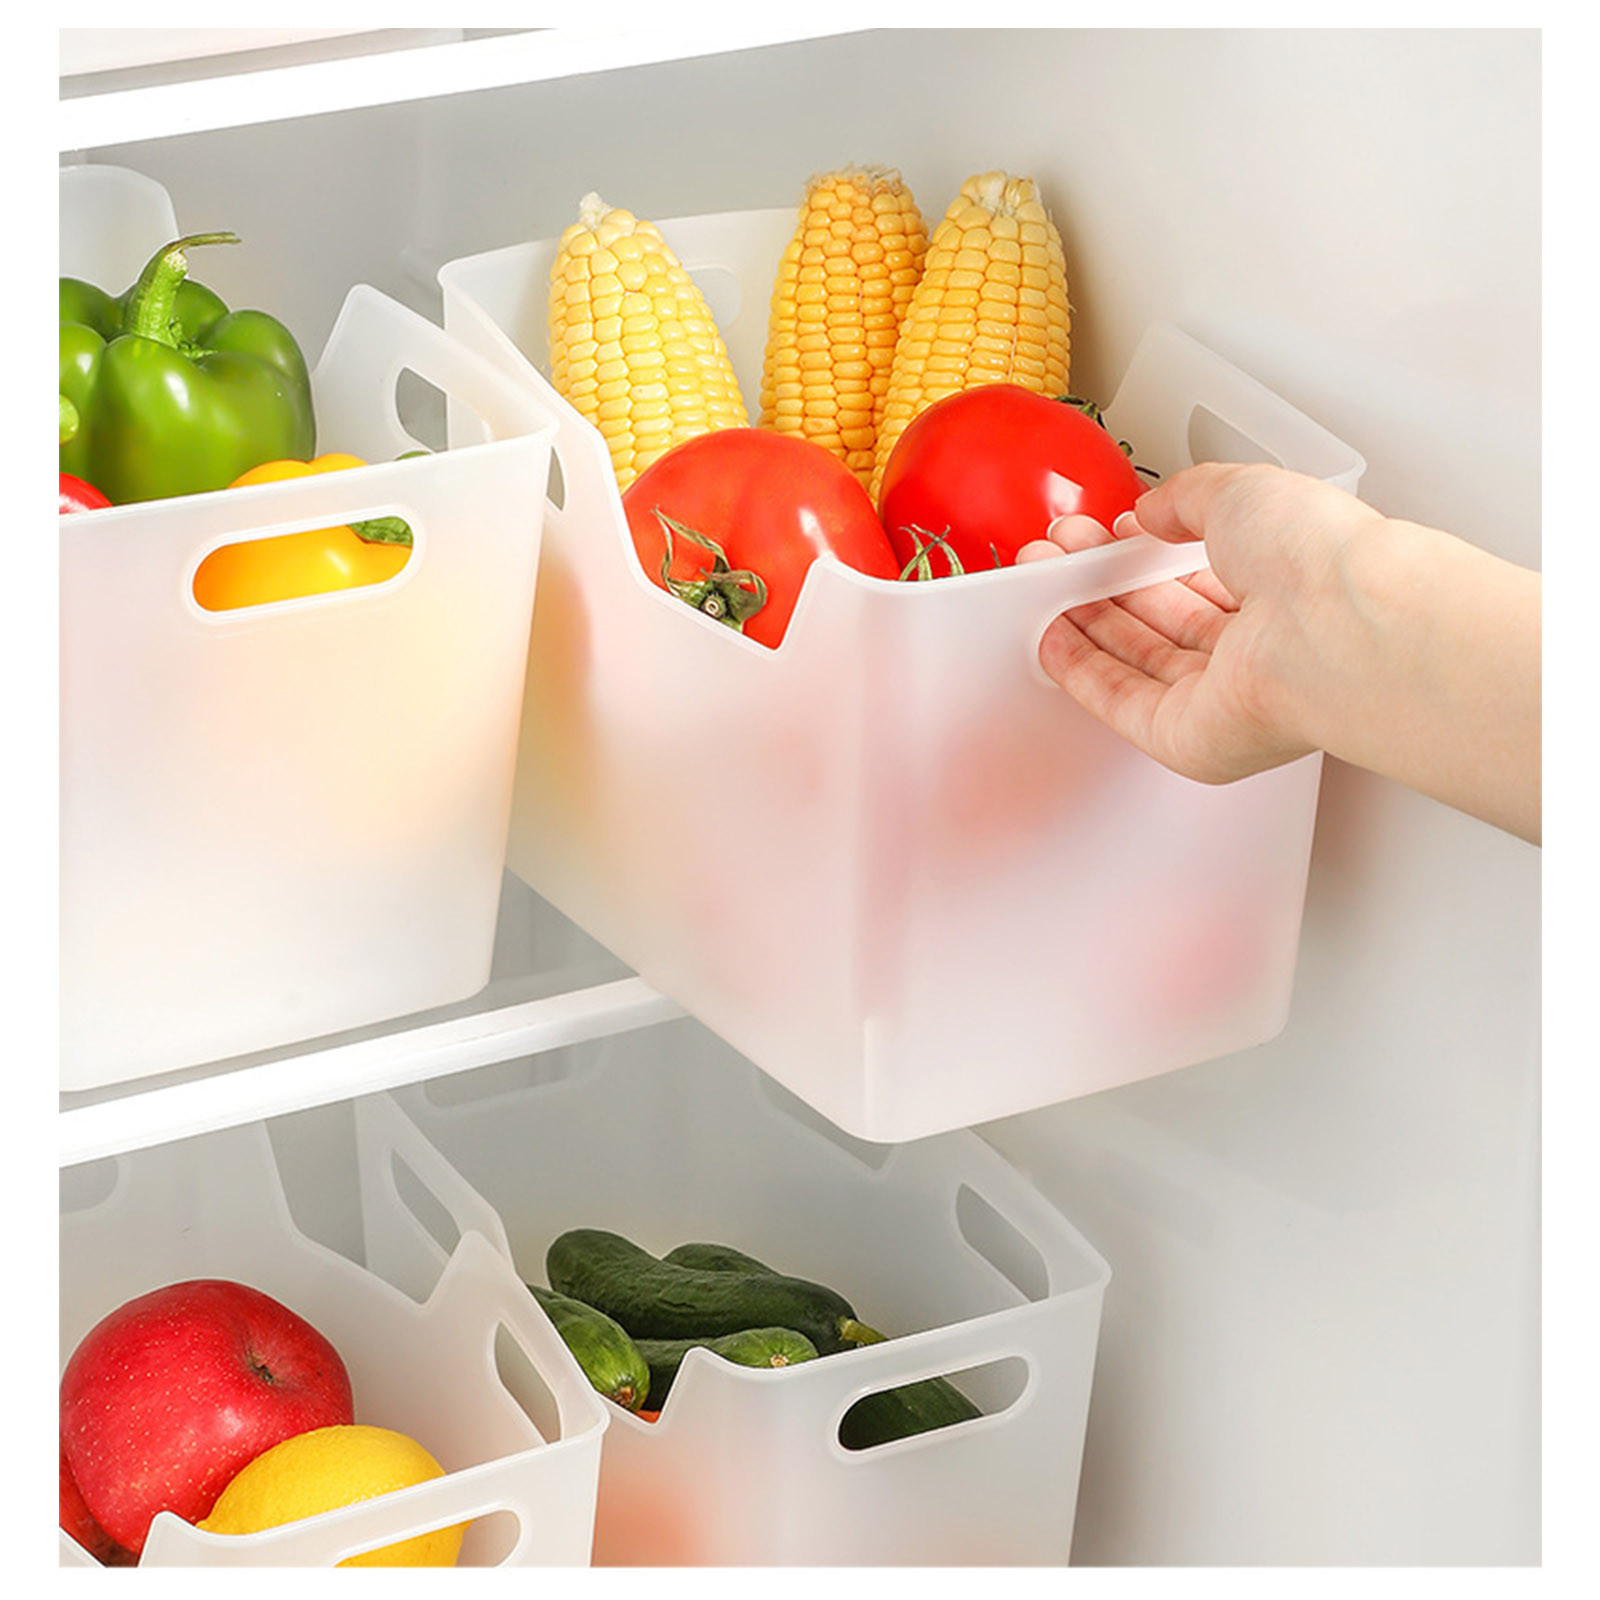 KQJQS White Plastic Storage Bins For Pantry Organization With Four Handles - image 4 of 8